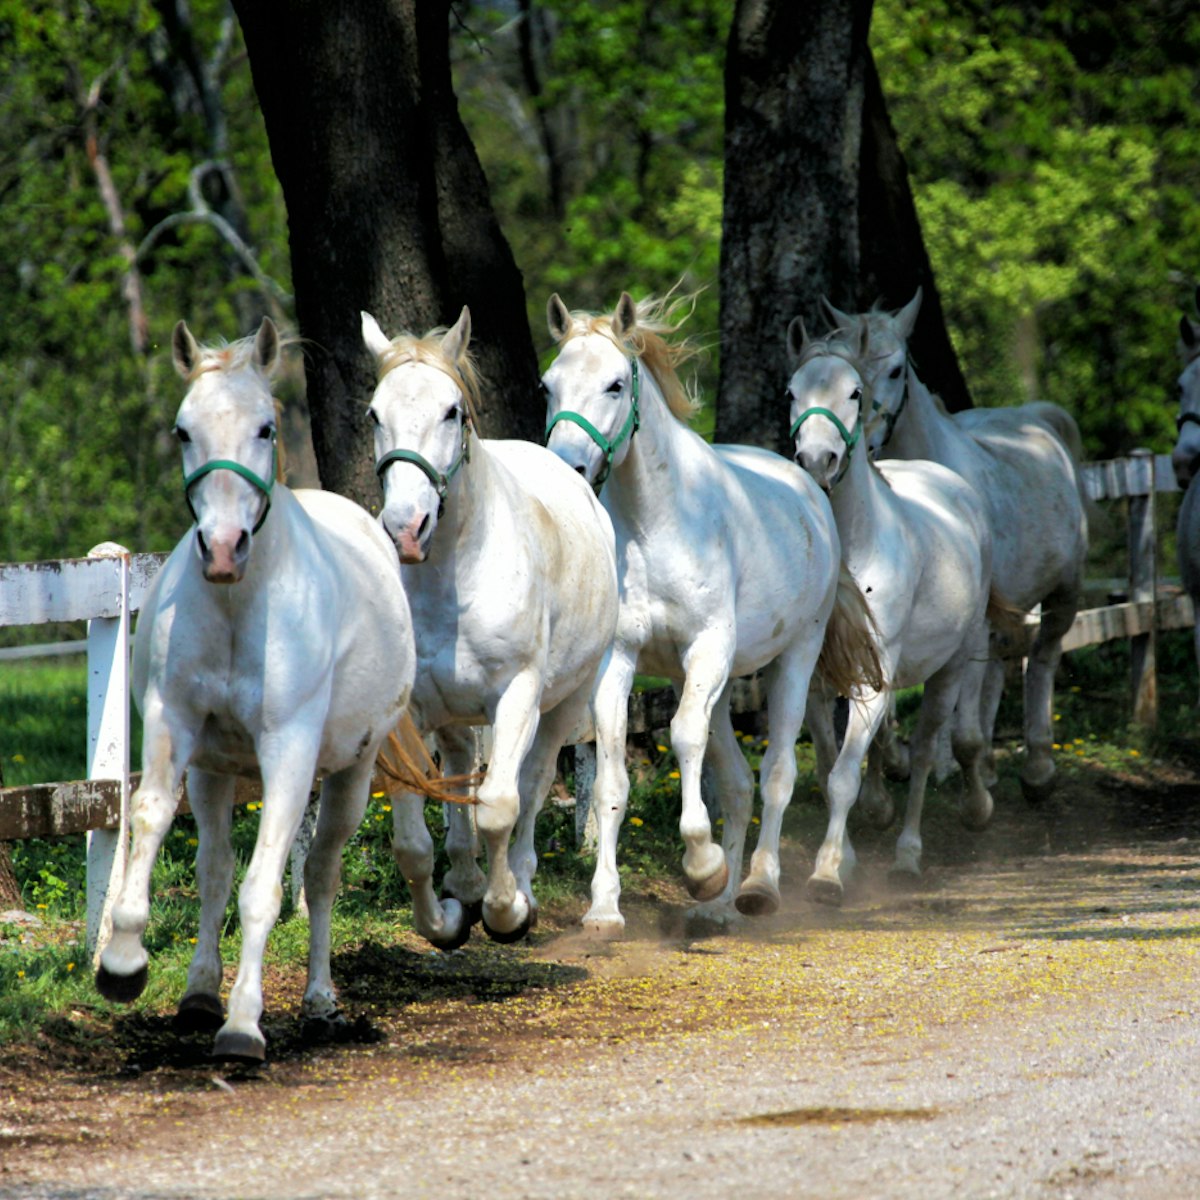 White Lipizzan Horses running; Shutterstock ID 342228359; Your name (First / Last): Anna Tyler; GL account no.: 65050; Netsuite department name: Online Editorial; Full Product or Project name including edition: destination-image-southern-europe